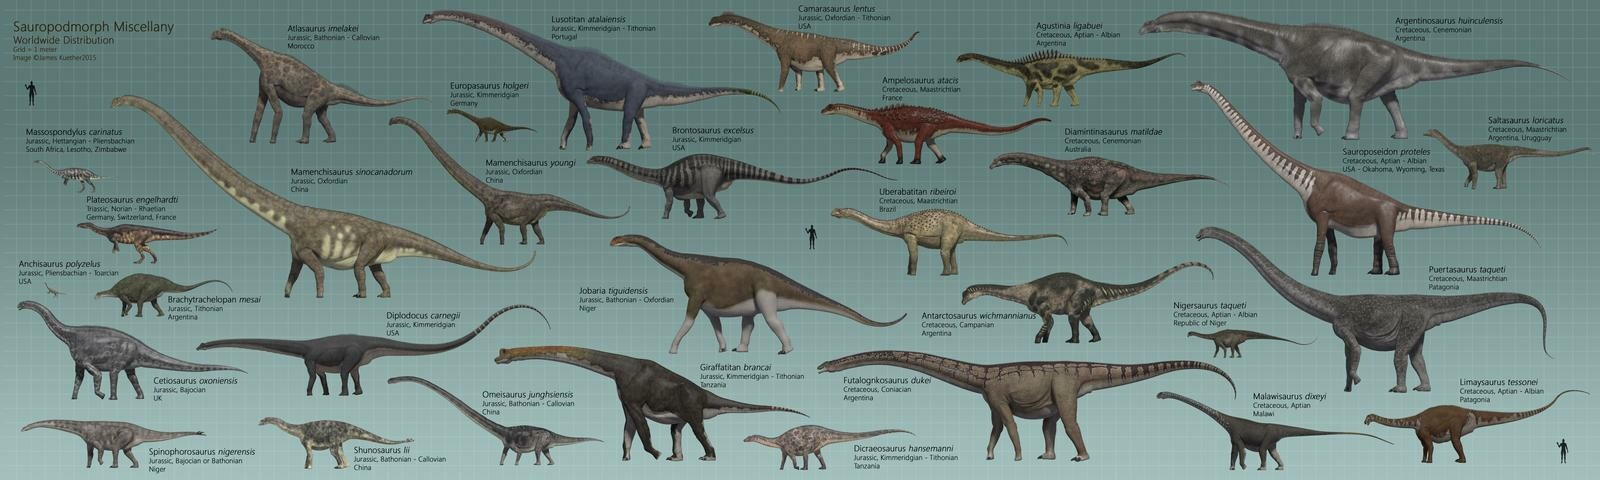 james kuether - Comparative Charts of Dinosaurs and other Prehistoric ...